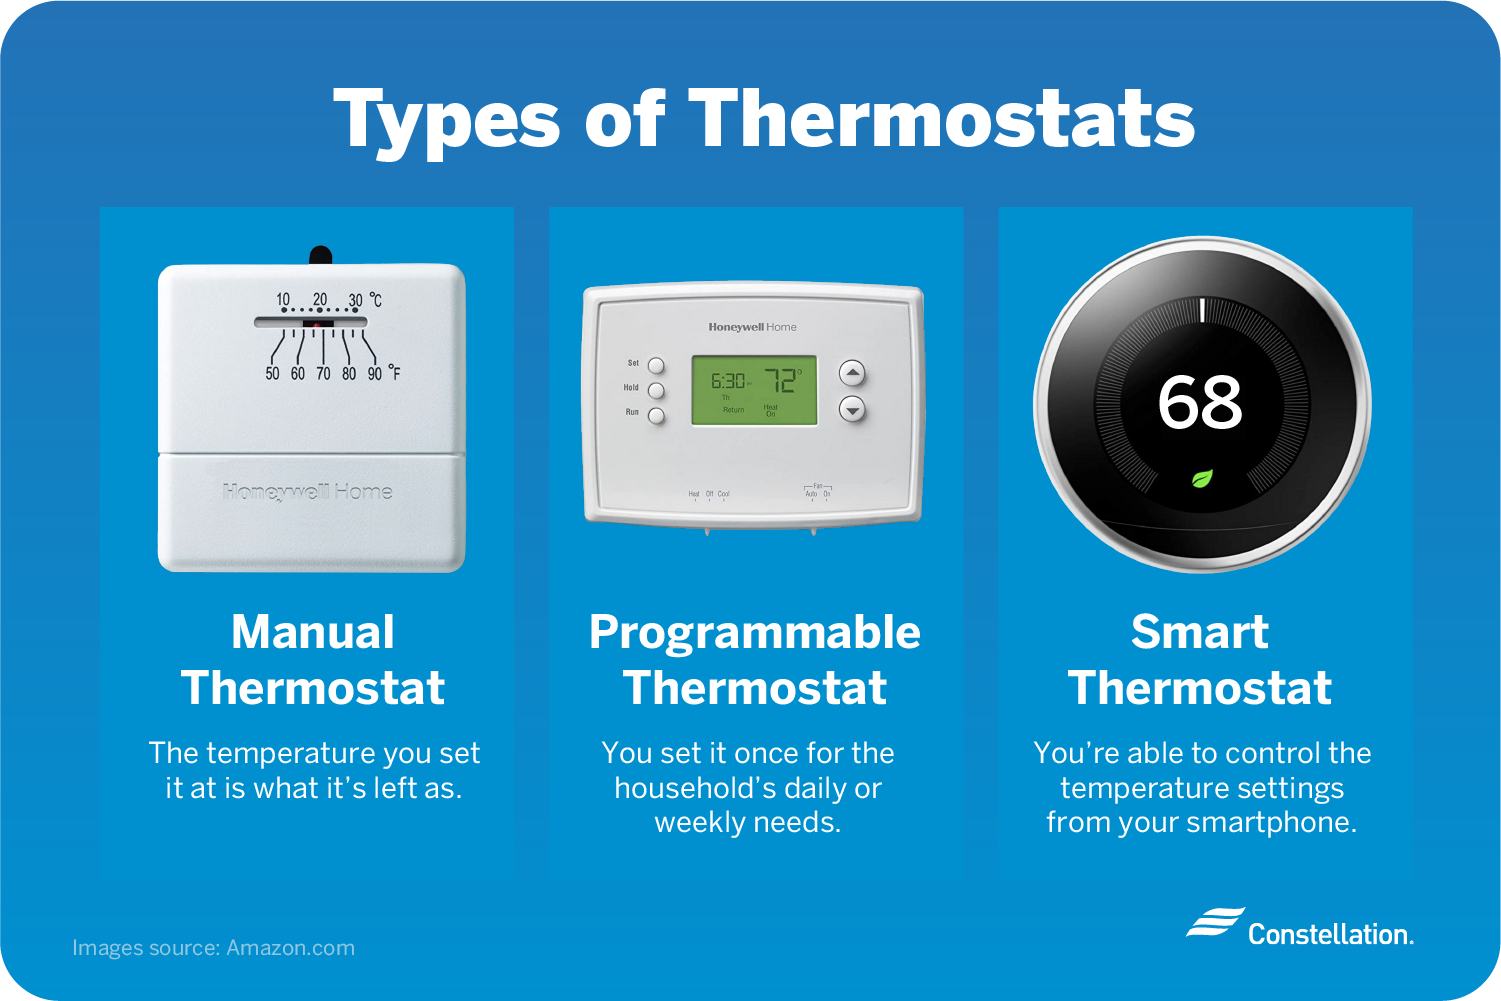 Different types of thermostats for your home.